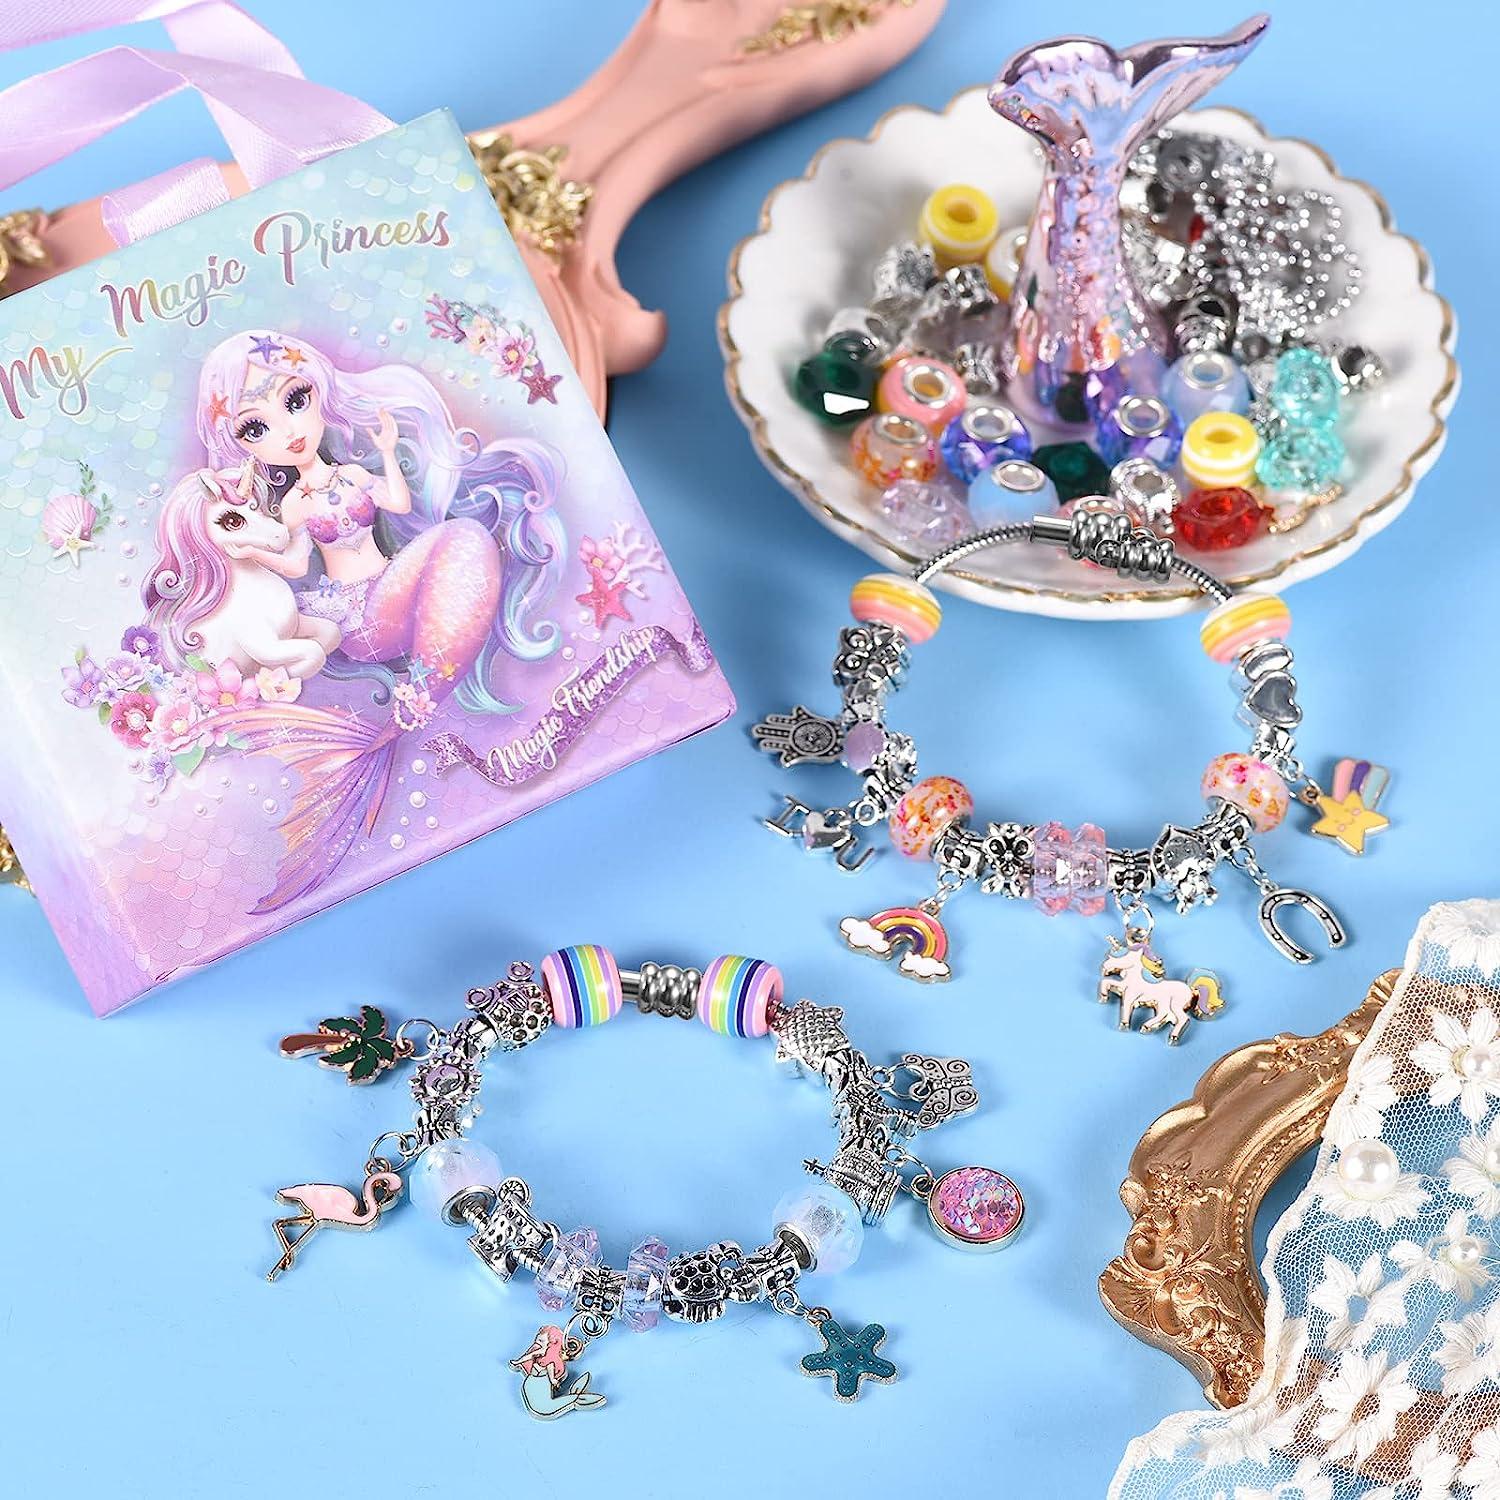 BDBKYWY Charm Bracelet Making Kit & Unicorn/Mermaid Girl Toy- ideal Crafts  for Girls Ages 8-12 The Perfect Gifts for Girls who Inspire Imagination and  Create Magic with Art Set and Jewelry Making Kit